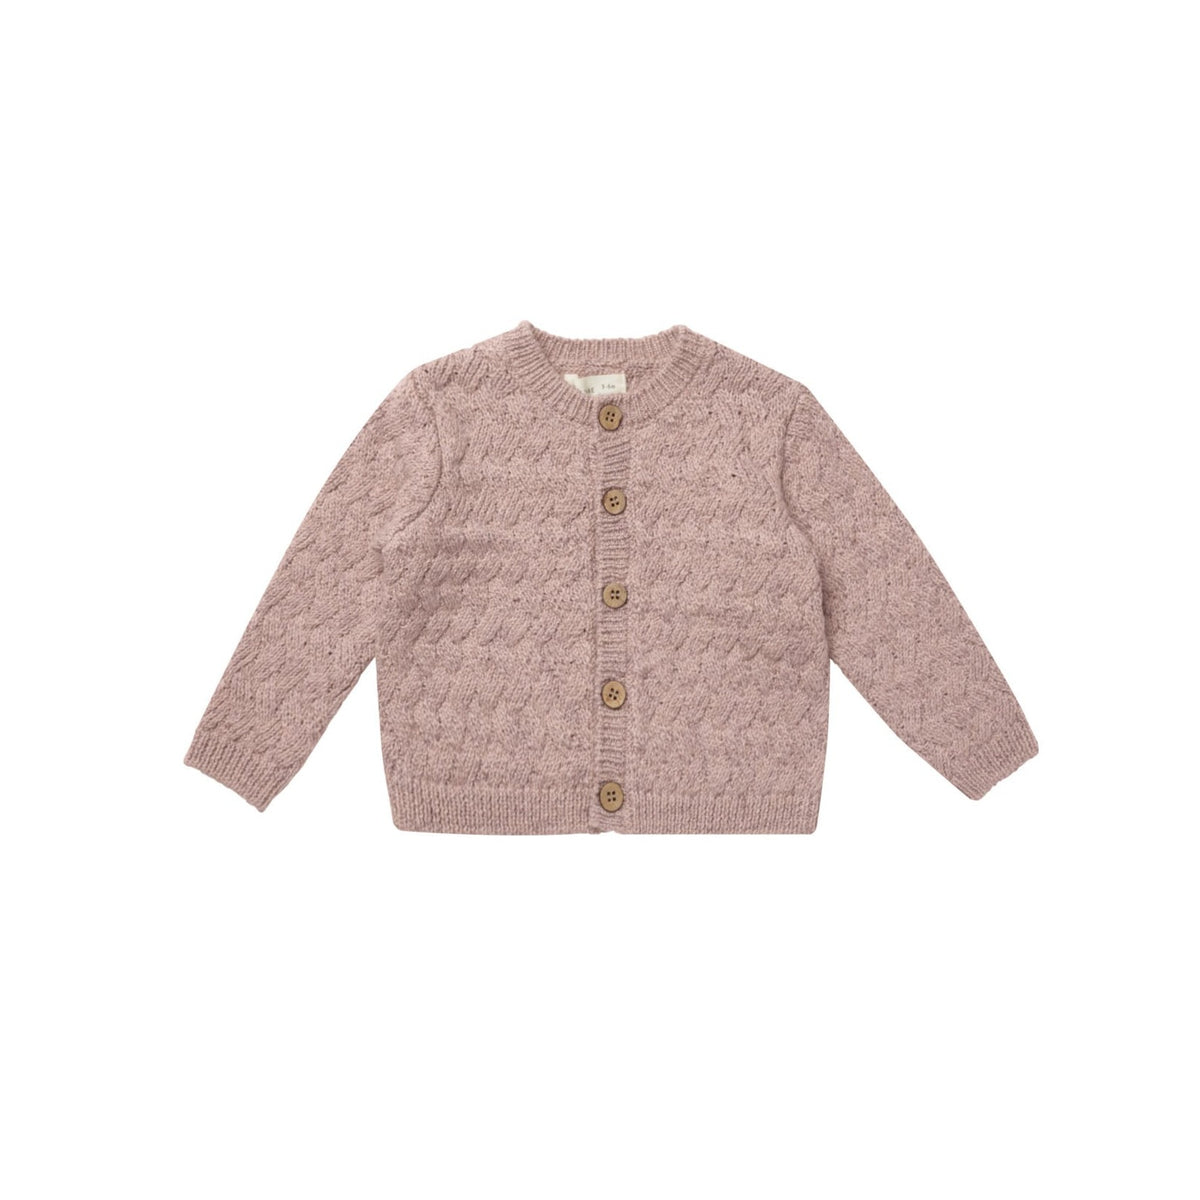 Quincy Mae Knit Cardigan Sweater - Mauve